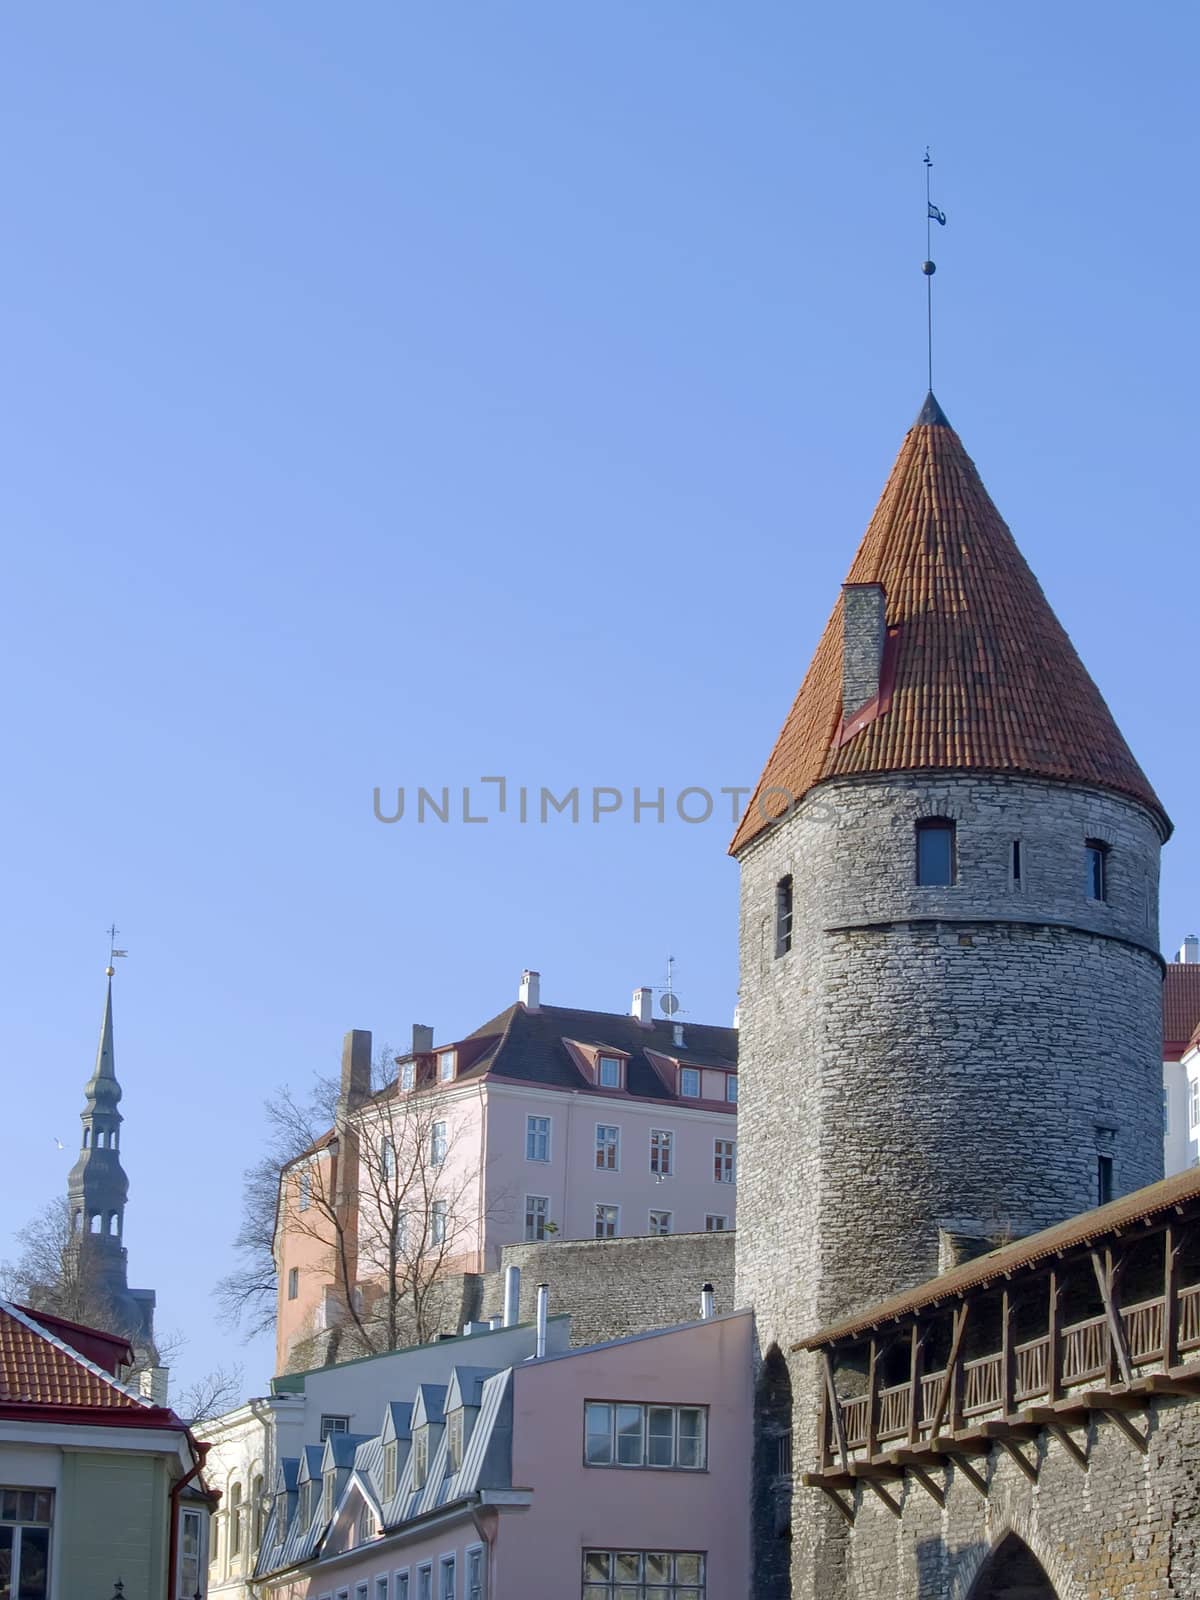 Medieval Fortification  and towers in capital of Estonia Tallinn by lem